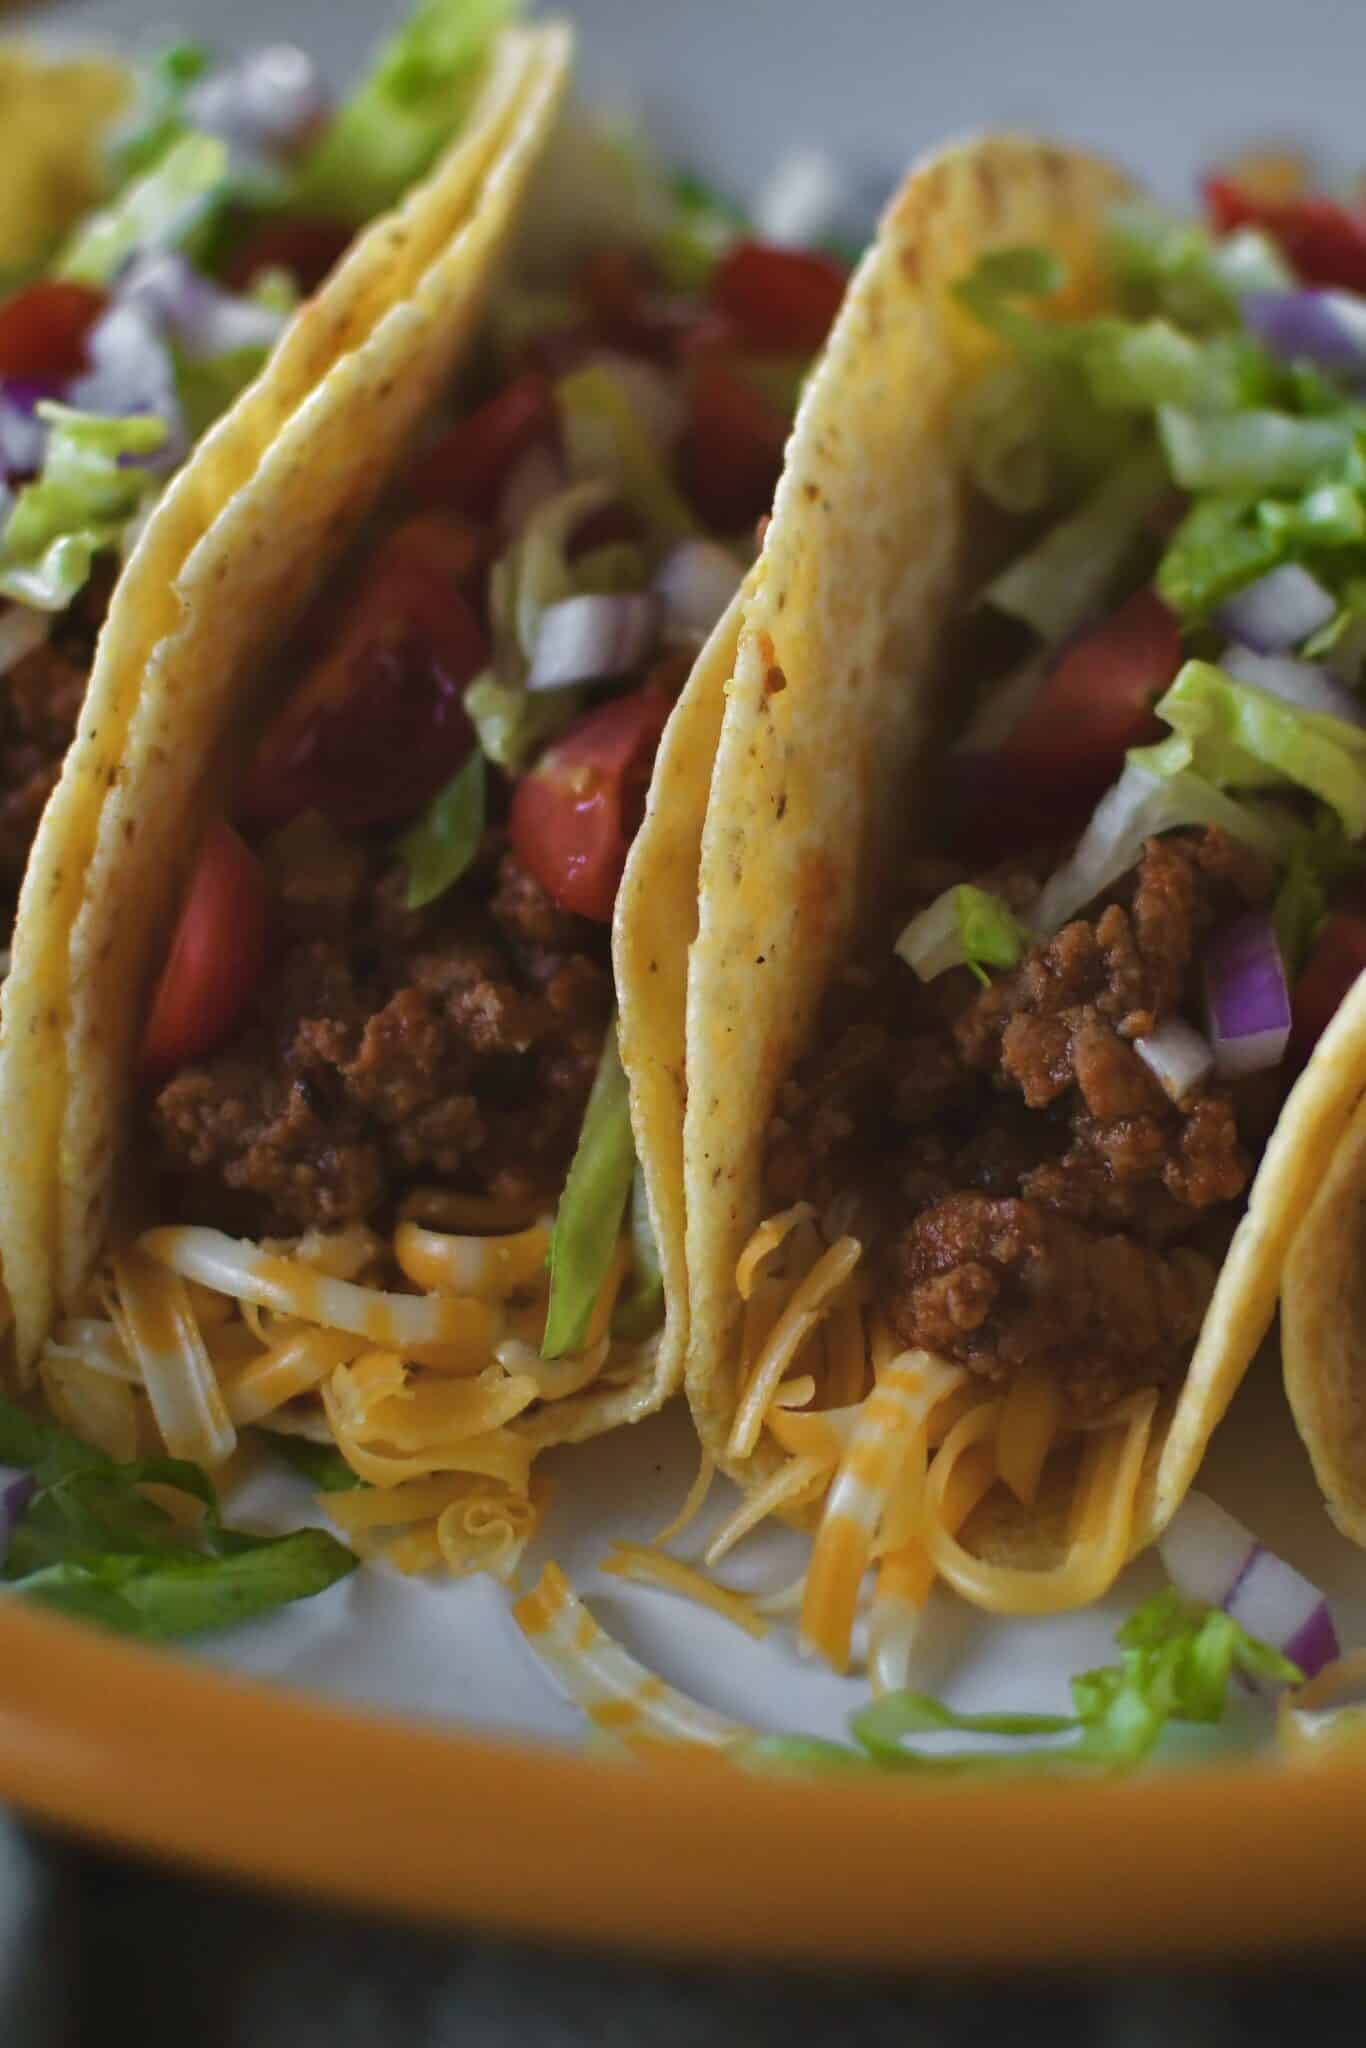 Ground Turkey Tacos lined up on a plate ready to eat.